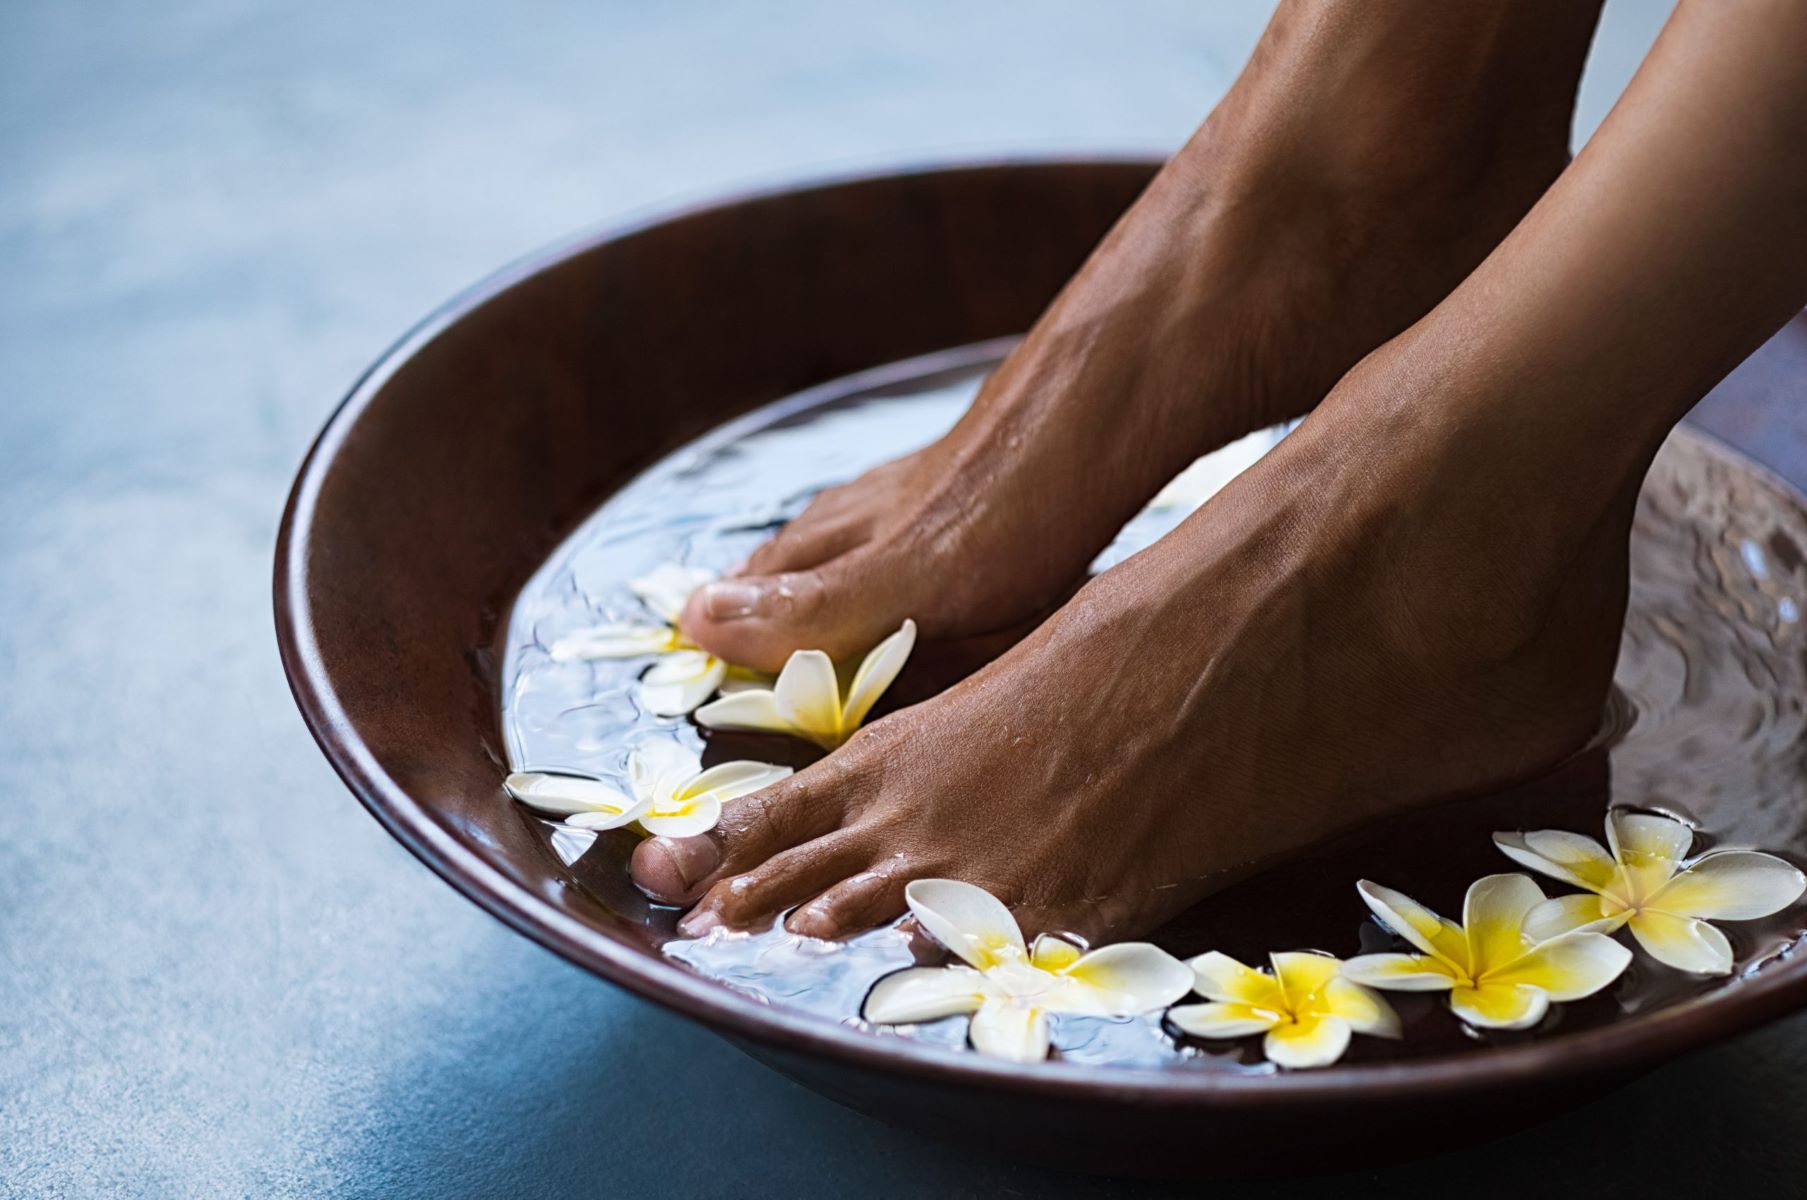 How To Clean A Home Foot Spa